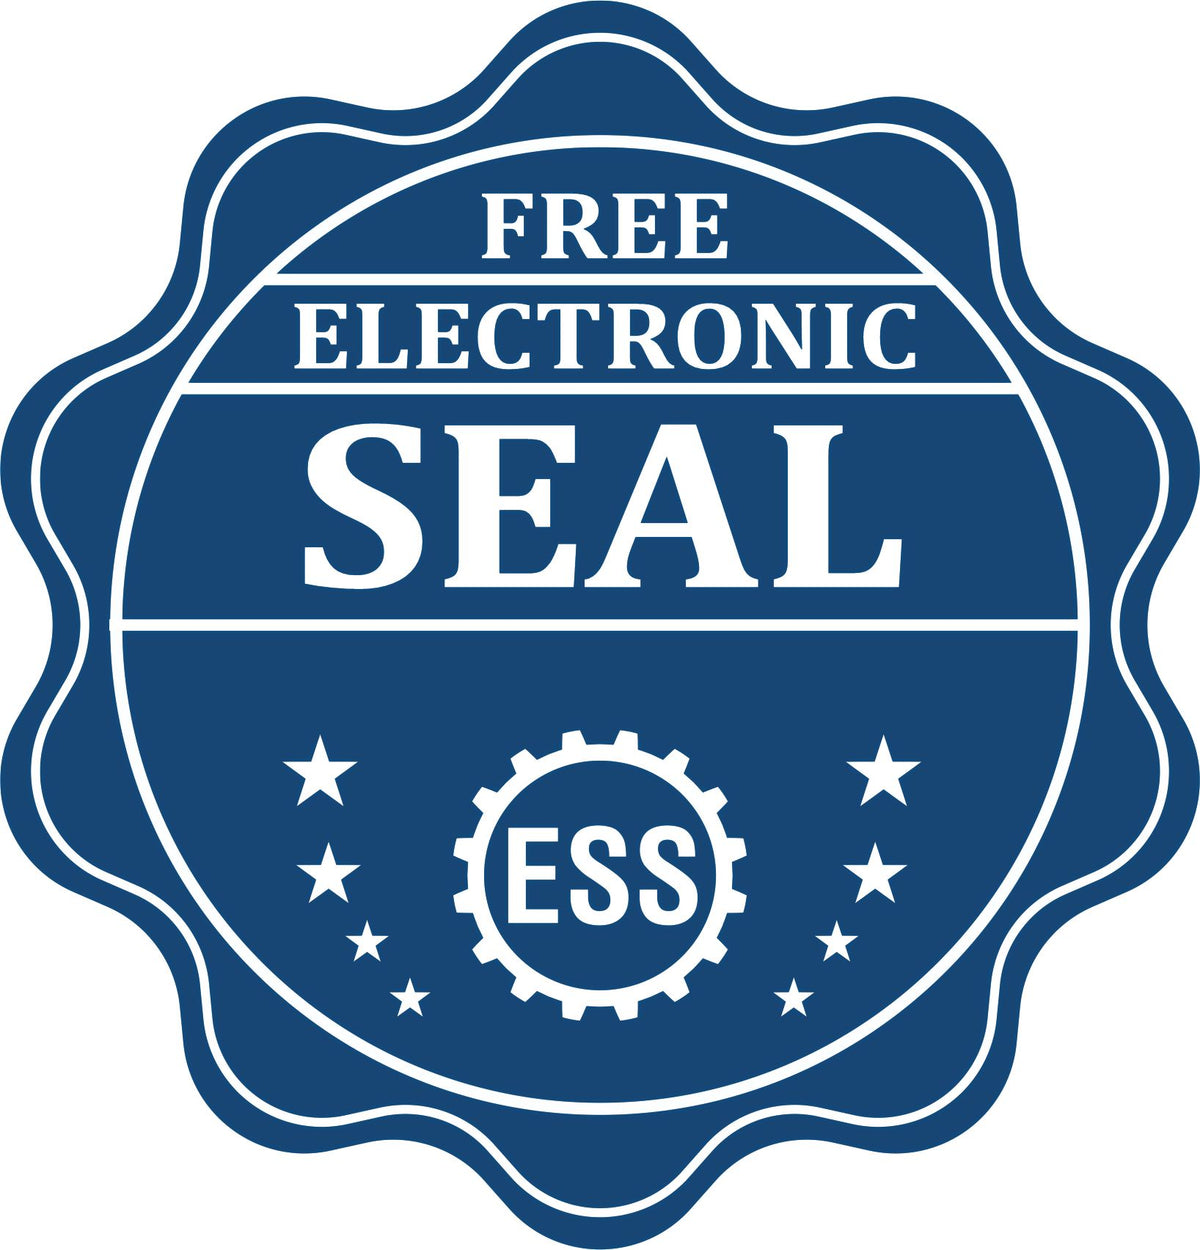 A badge showing a free electronic seal for the Slim Pre-Inked Hawaii Architect Seal Stamp with stars and the ESS gear on the emblem.